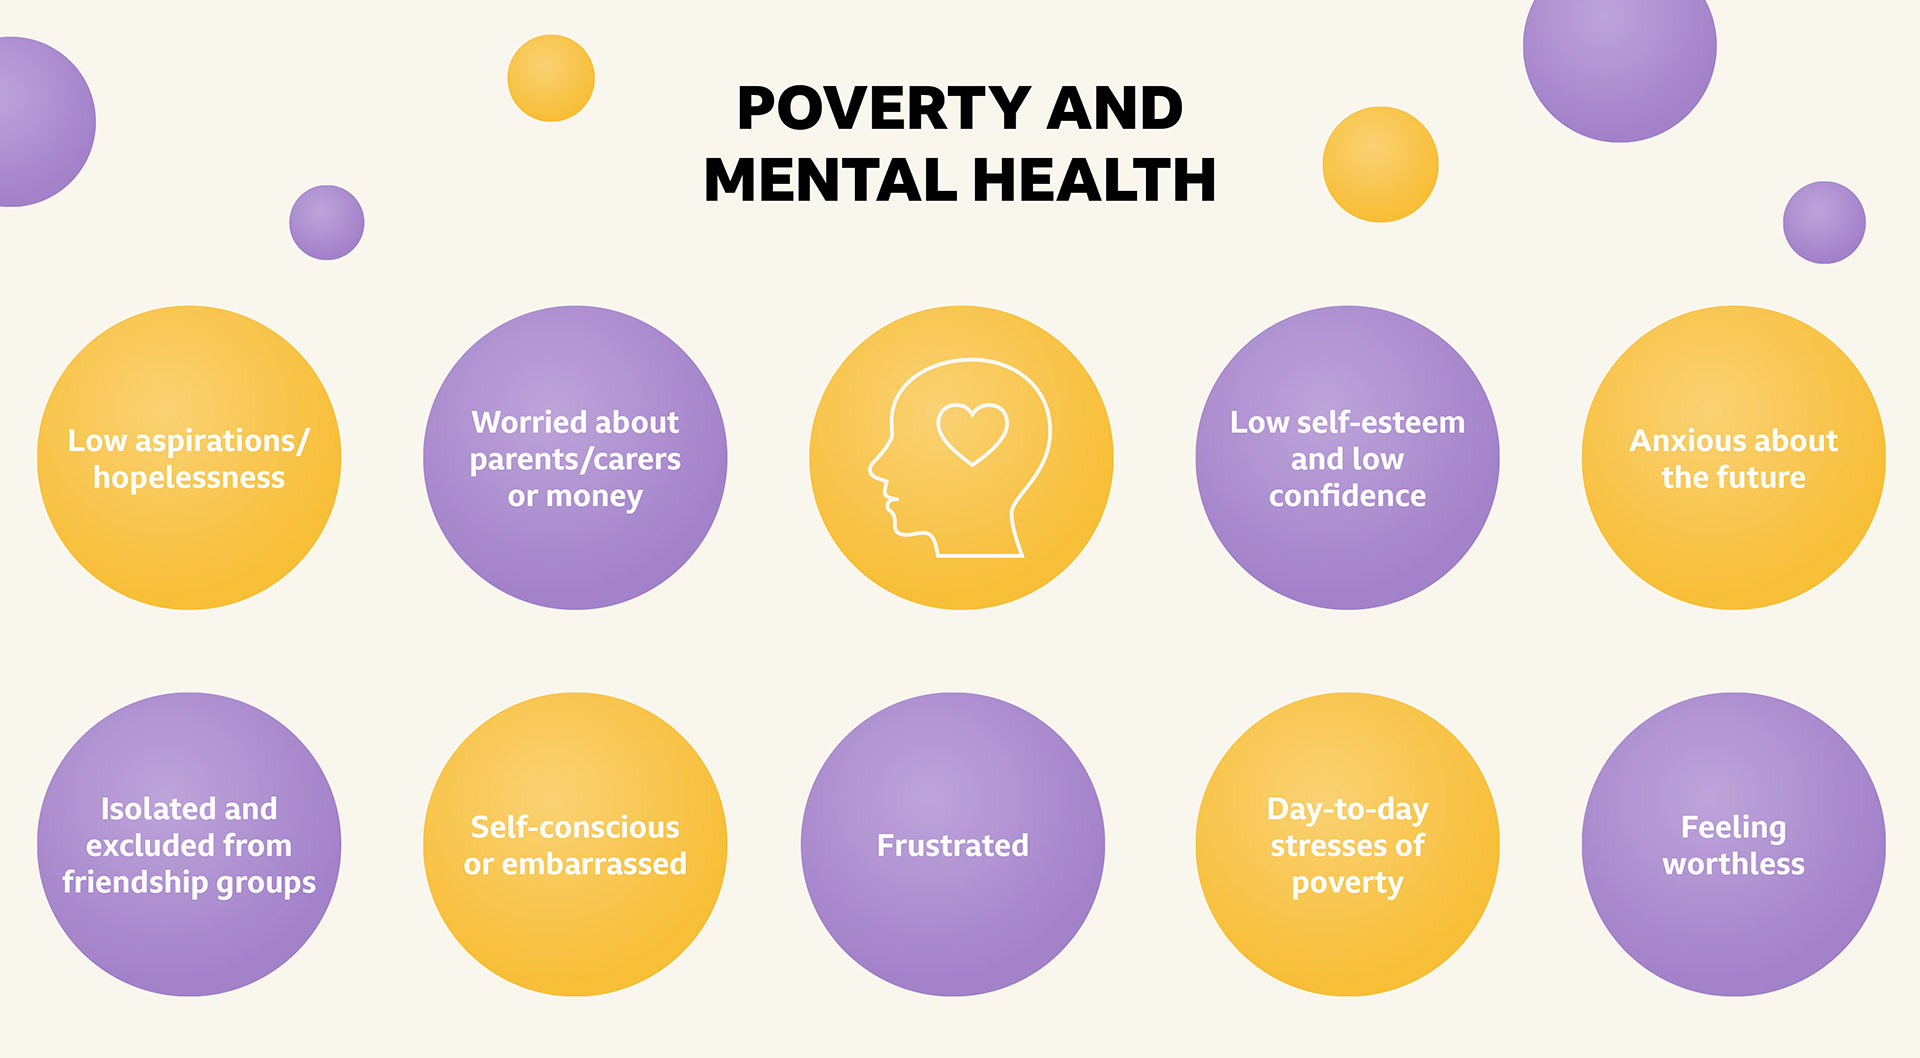 Mental health and poverty